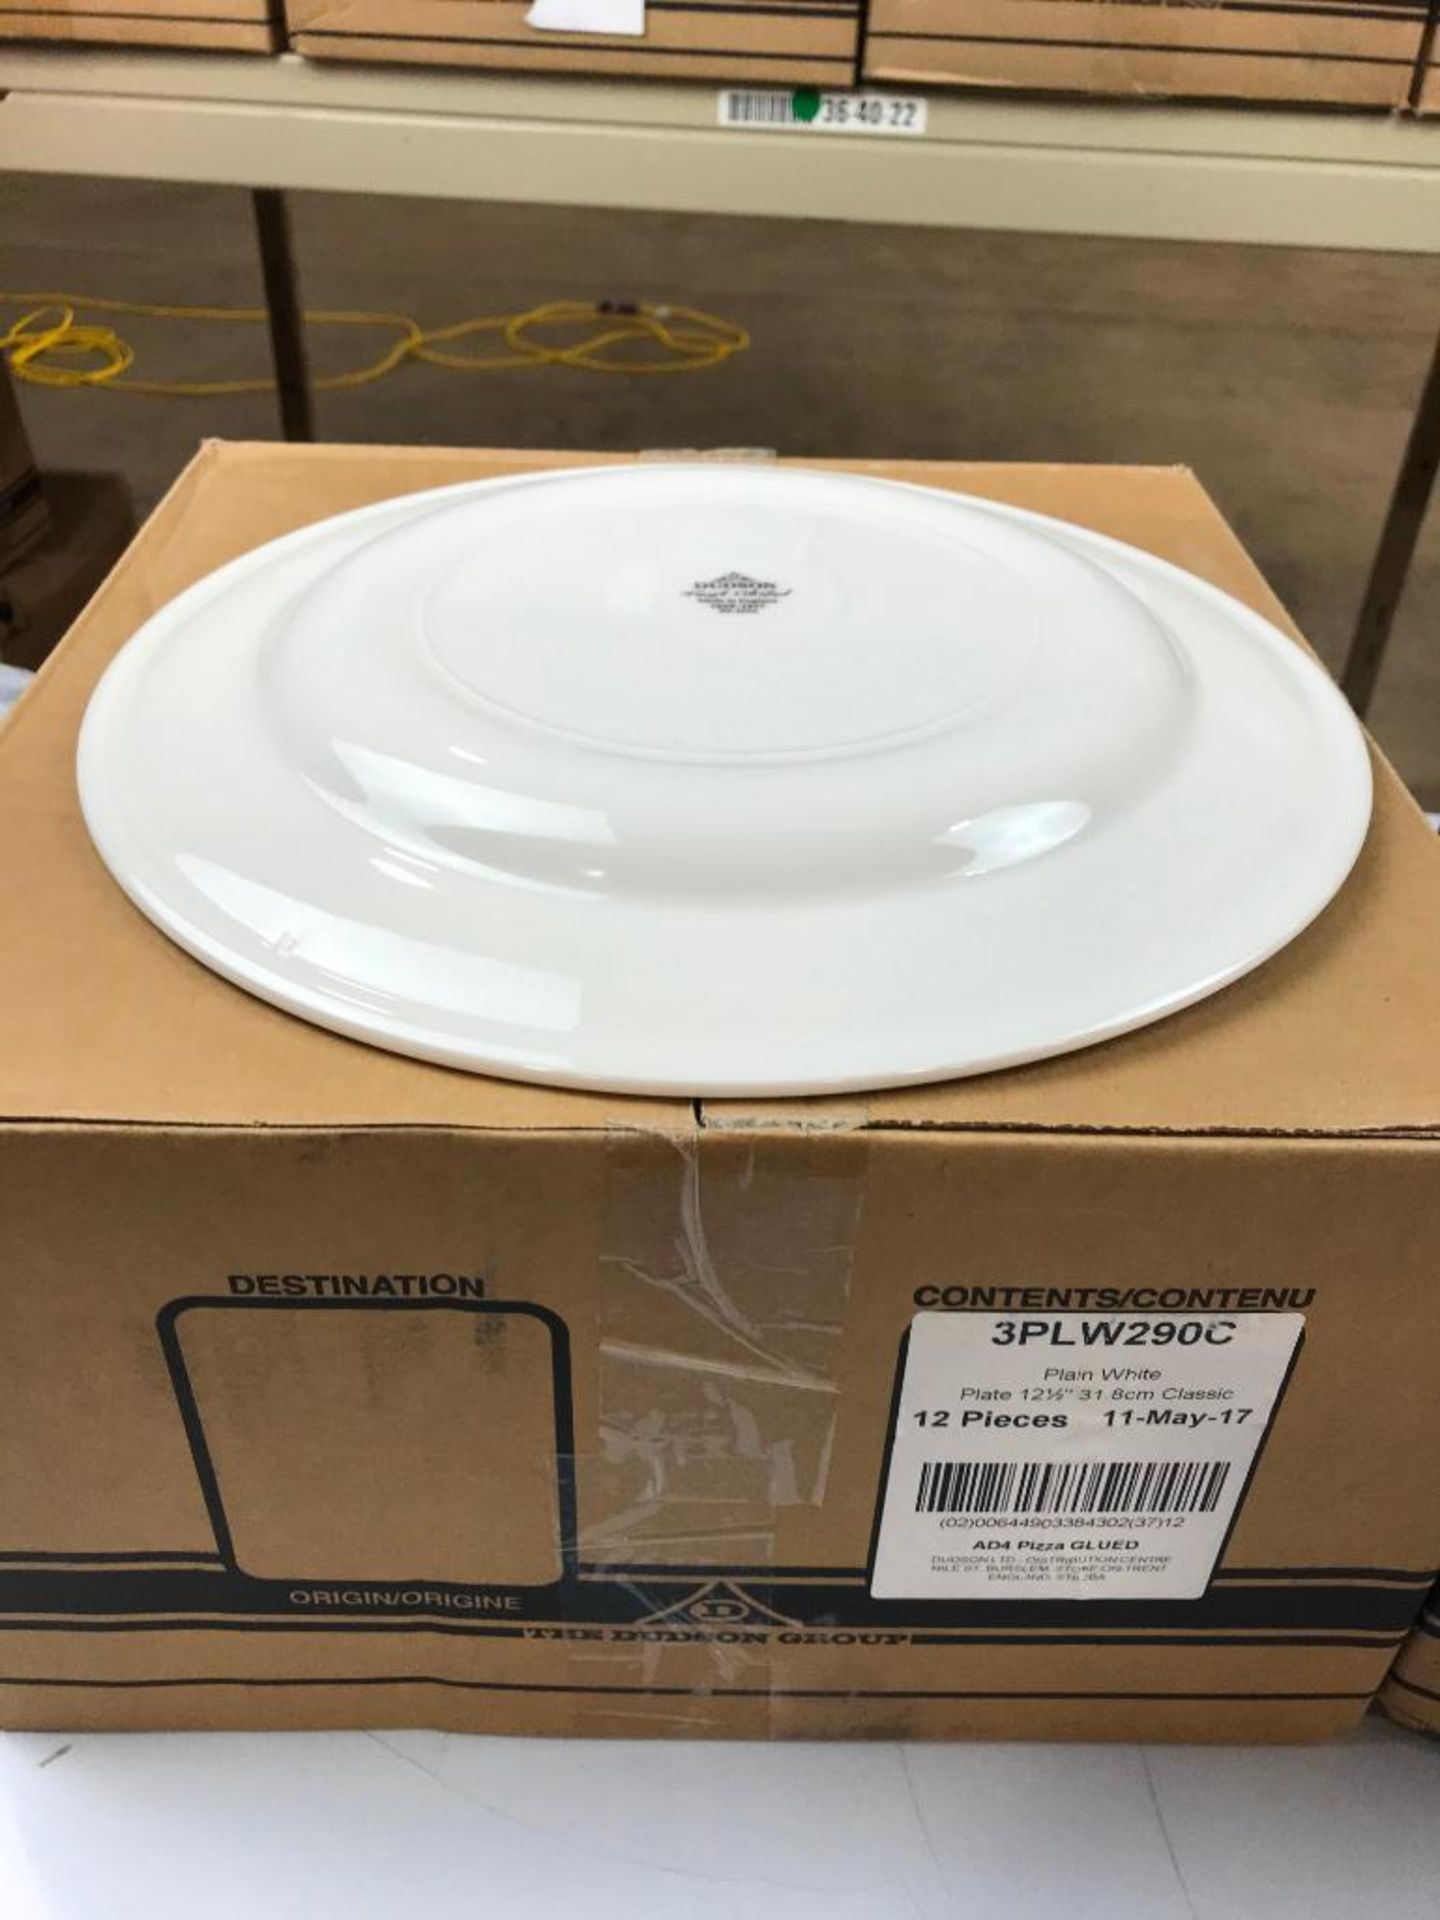 2 CASES OF DUDSON CLASSIC PLATE 12.5" - 12/CASE, MADE IN ENGLAND - Image 3 of 6